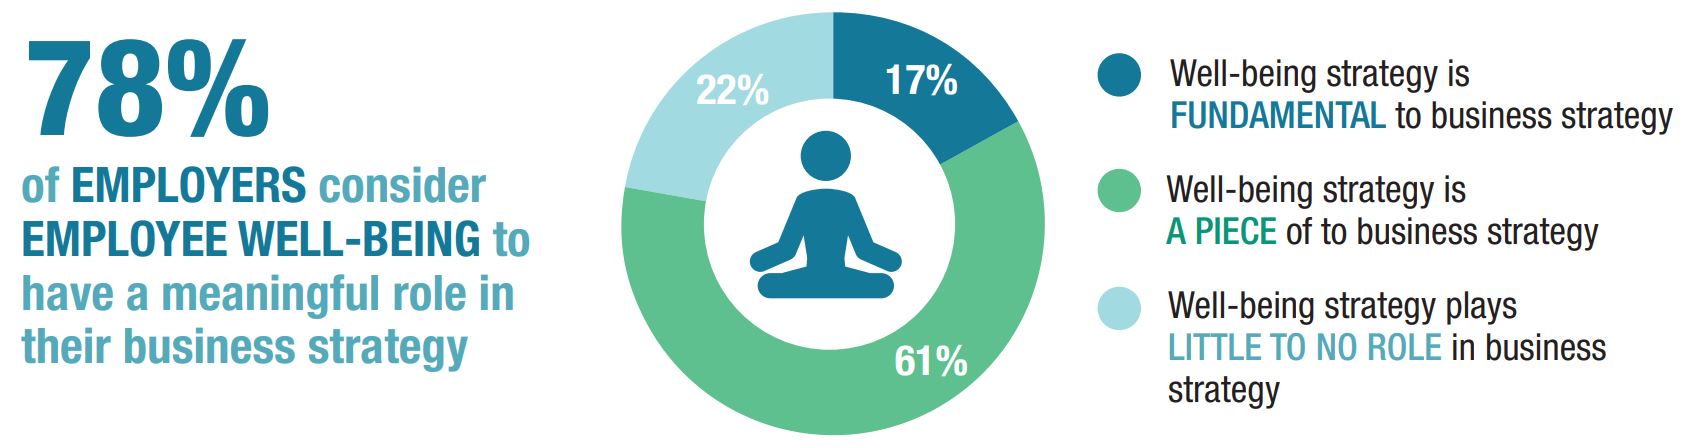 78% of employers consider employee well-being to have a meaningful role in their business strategy